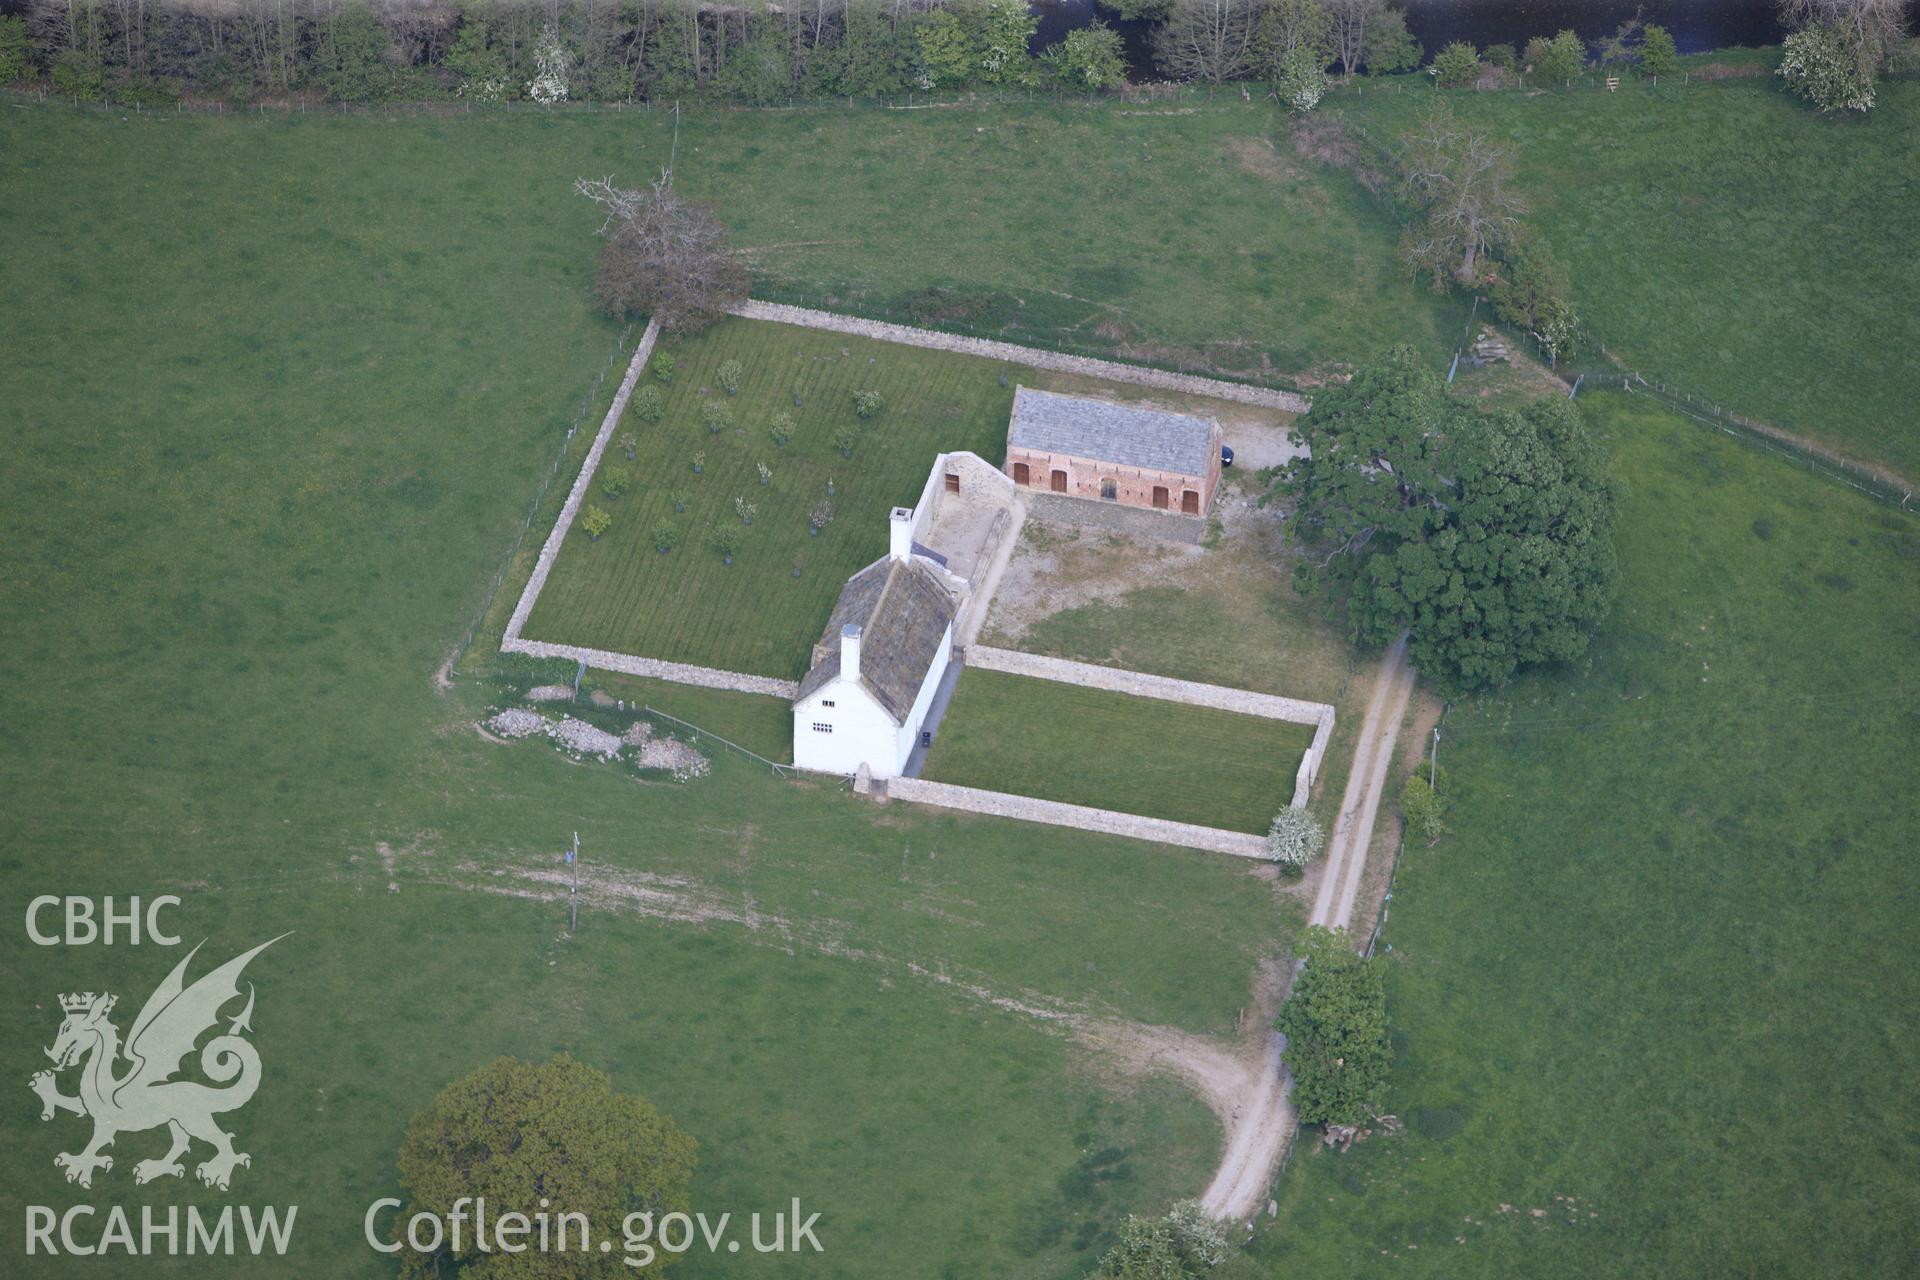 RCAHMW colour oblique photograph of Dolbelydir, house and barn. Taken by Toby Driver on 03/05/2011.